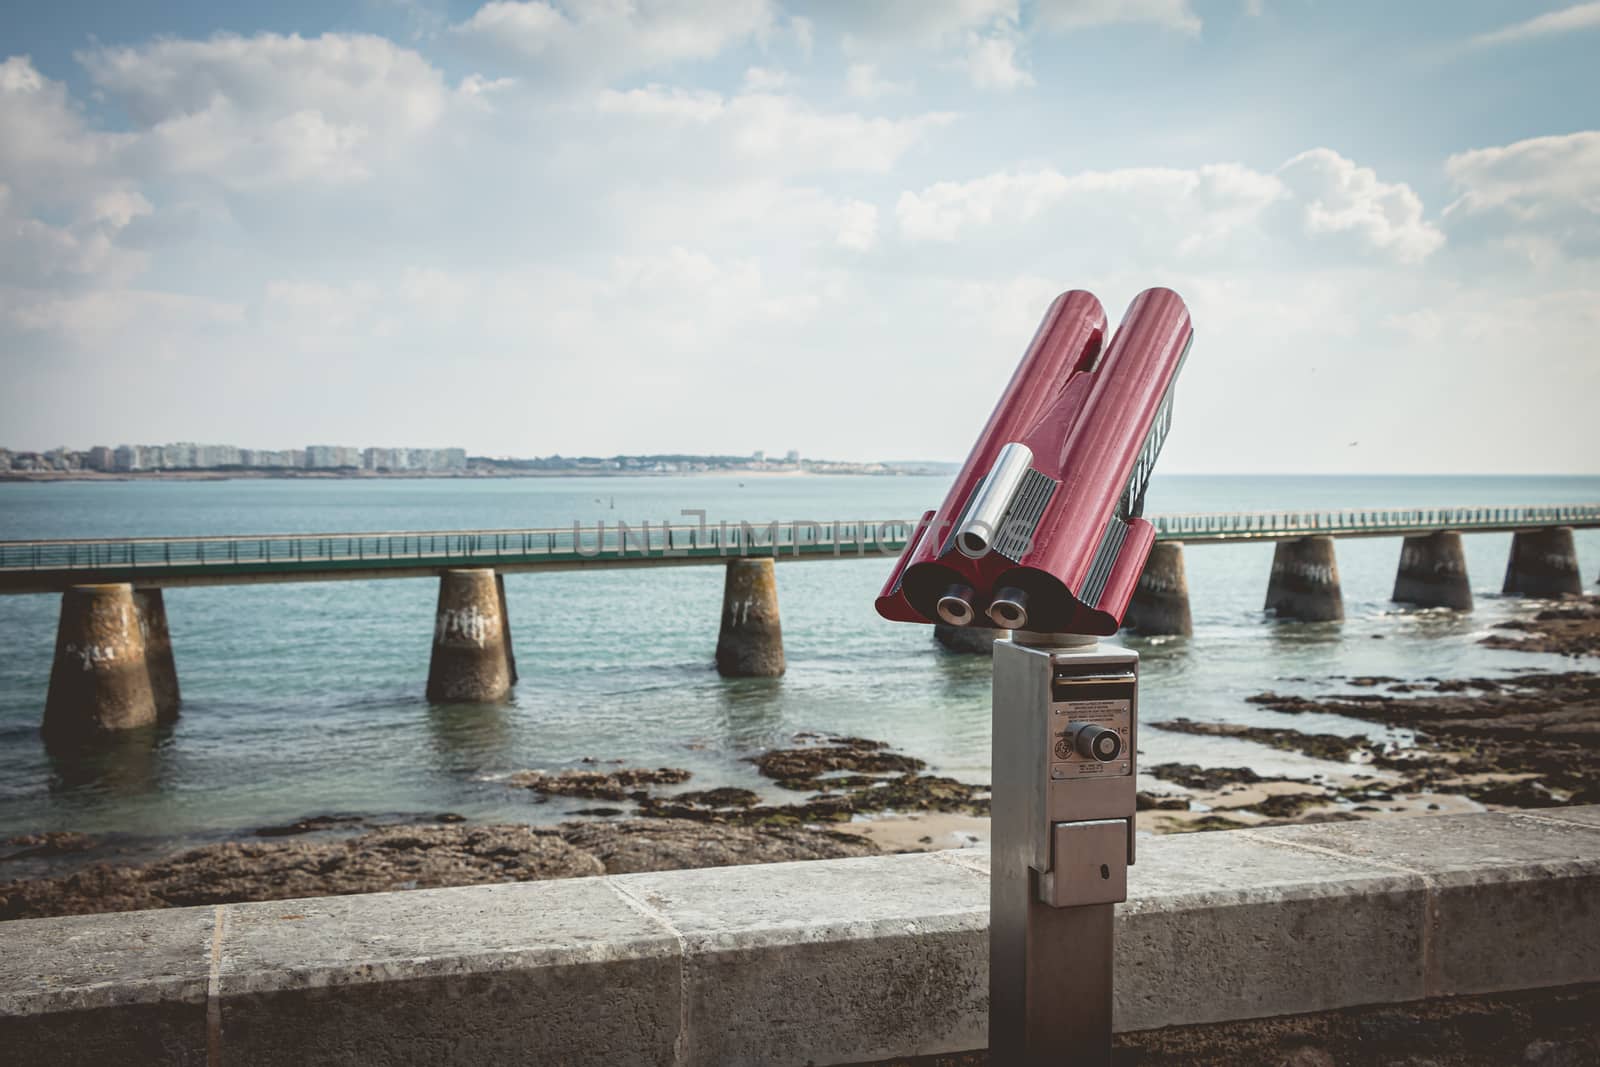 Sables d Olonne, France - October 13, 2015 : binocular telescope for tourist pointed to the beach on a fall day